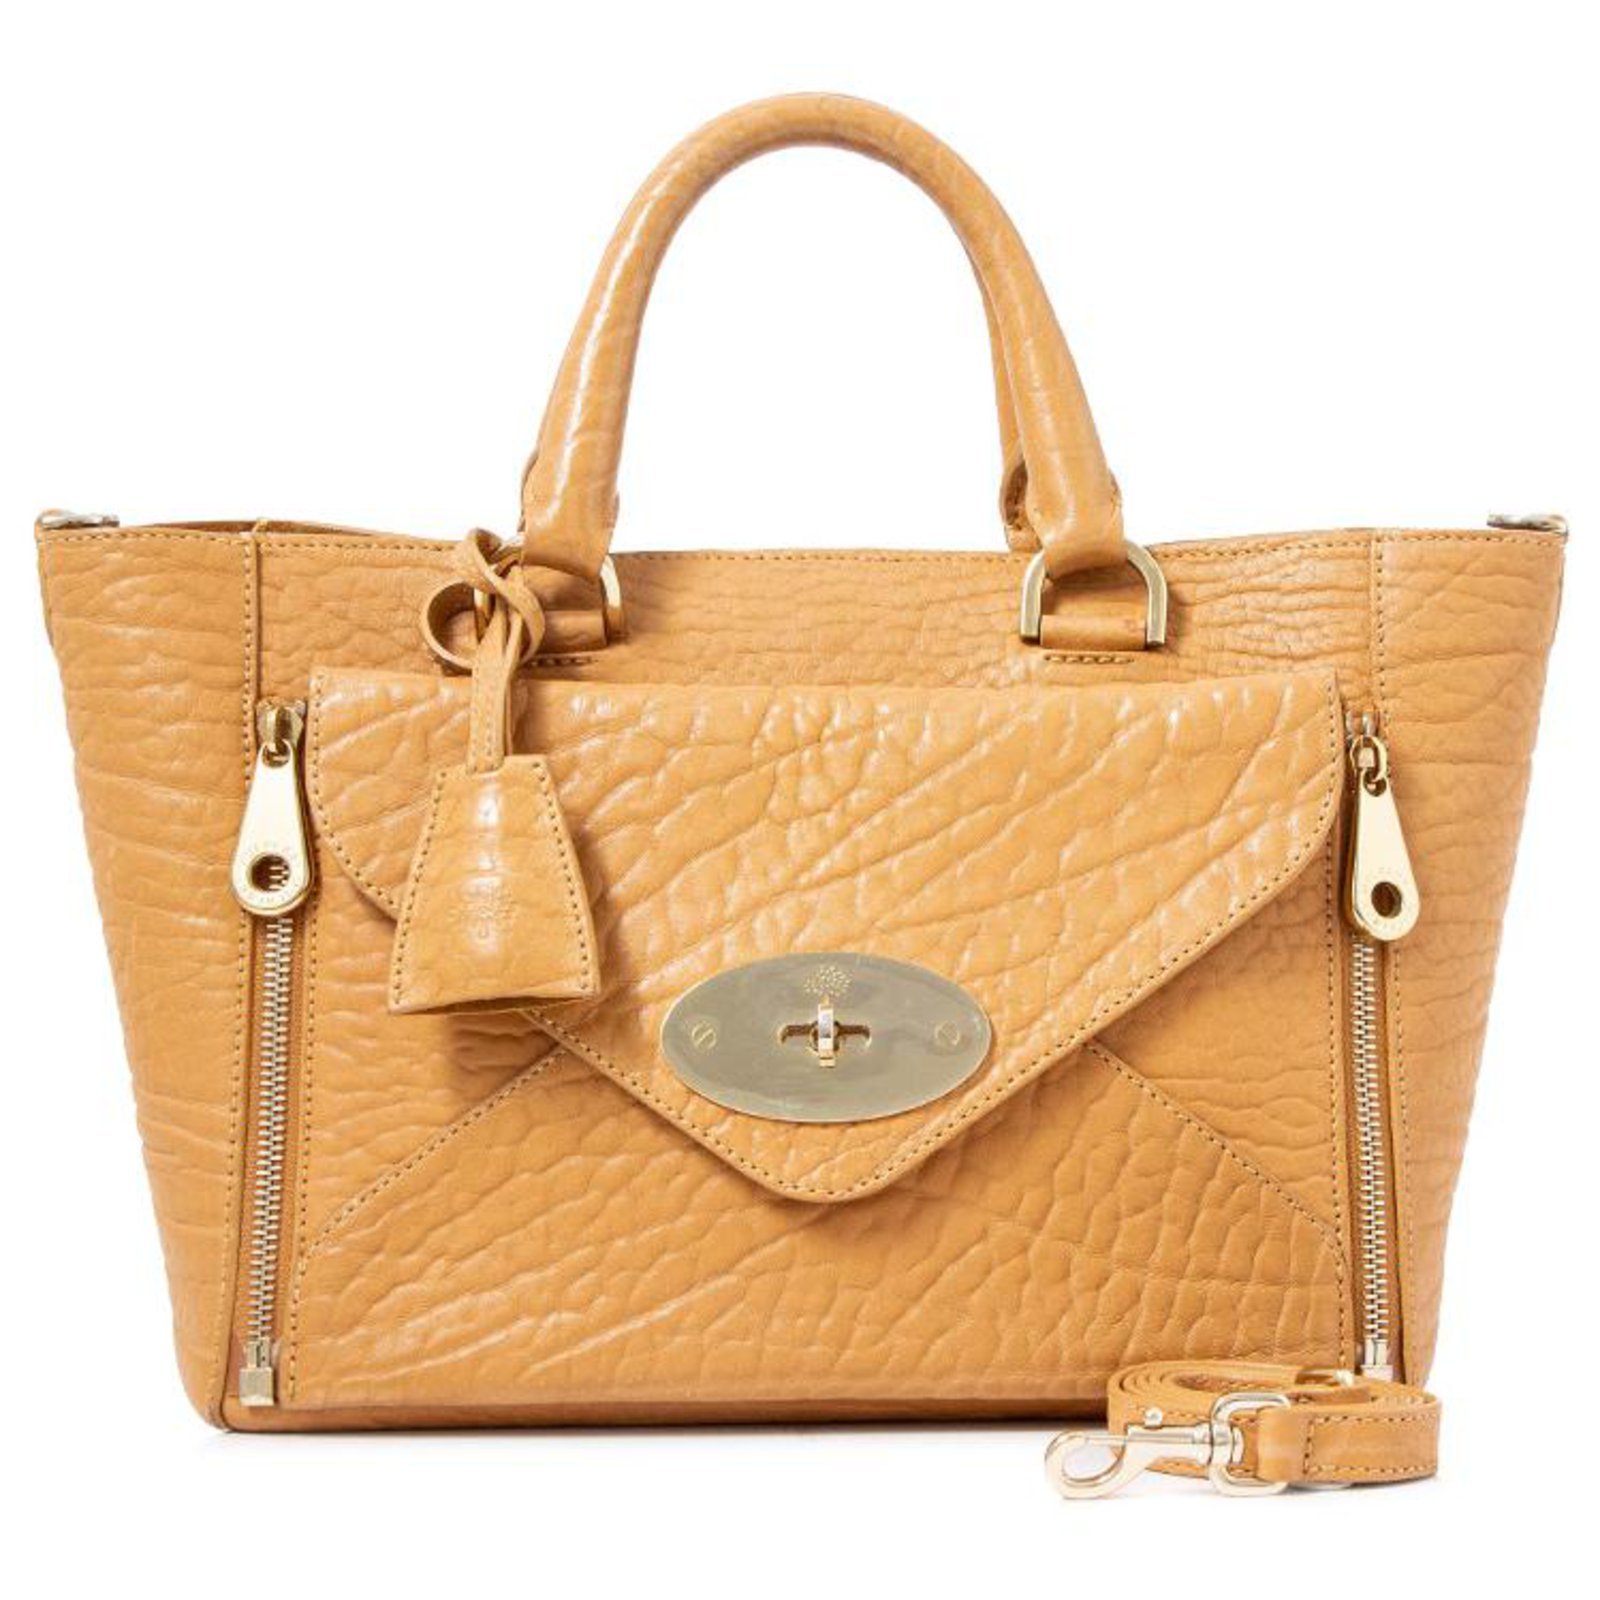 The Mulberry willow tote bag